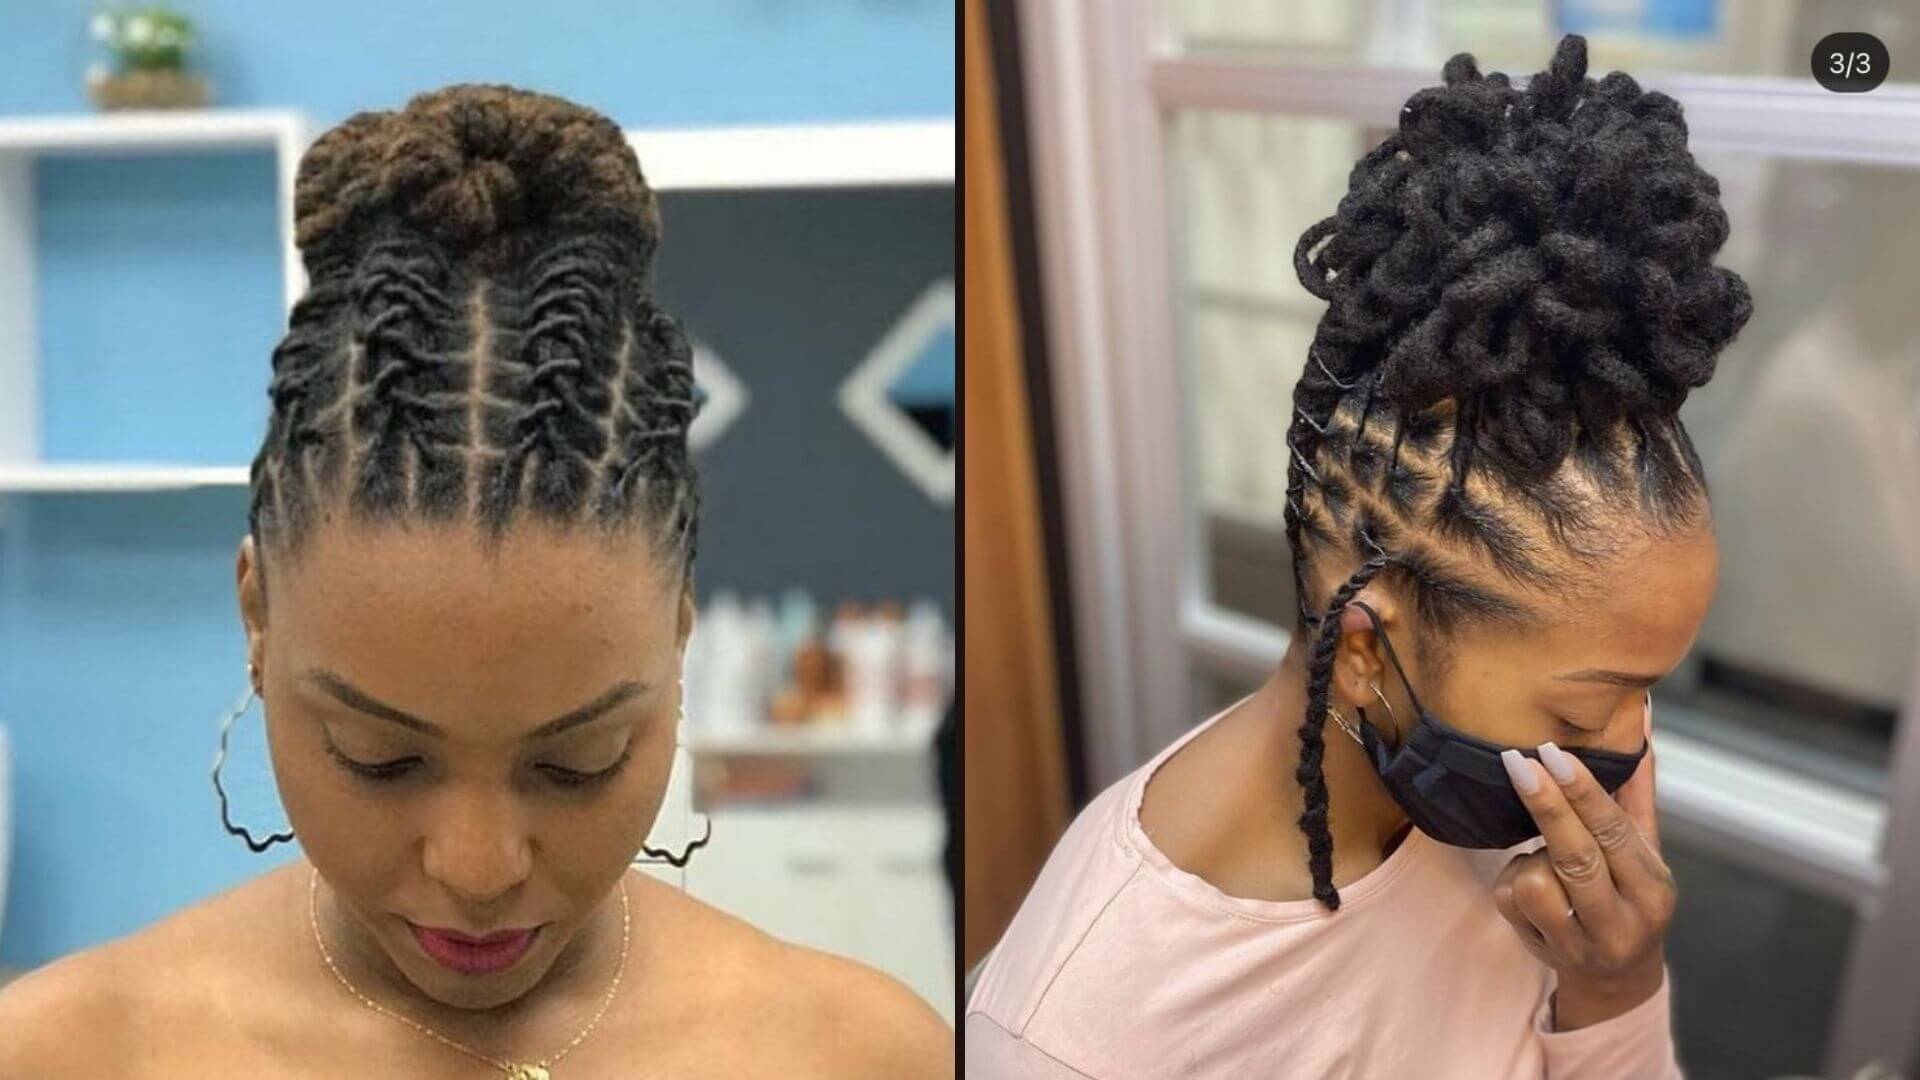 Short Thick Hair dread styles with bun and braids